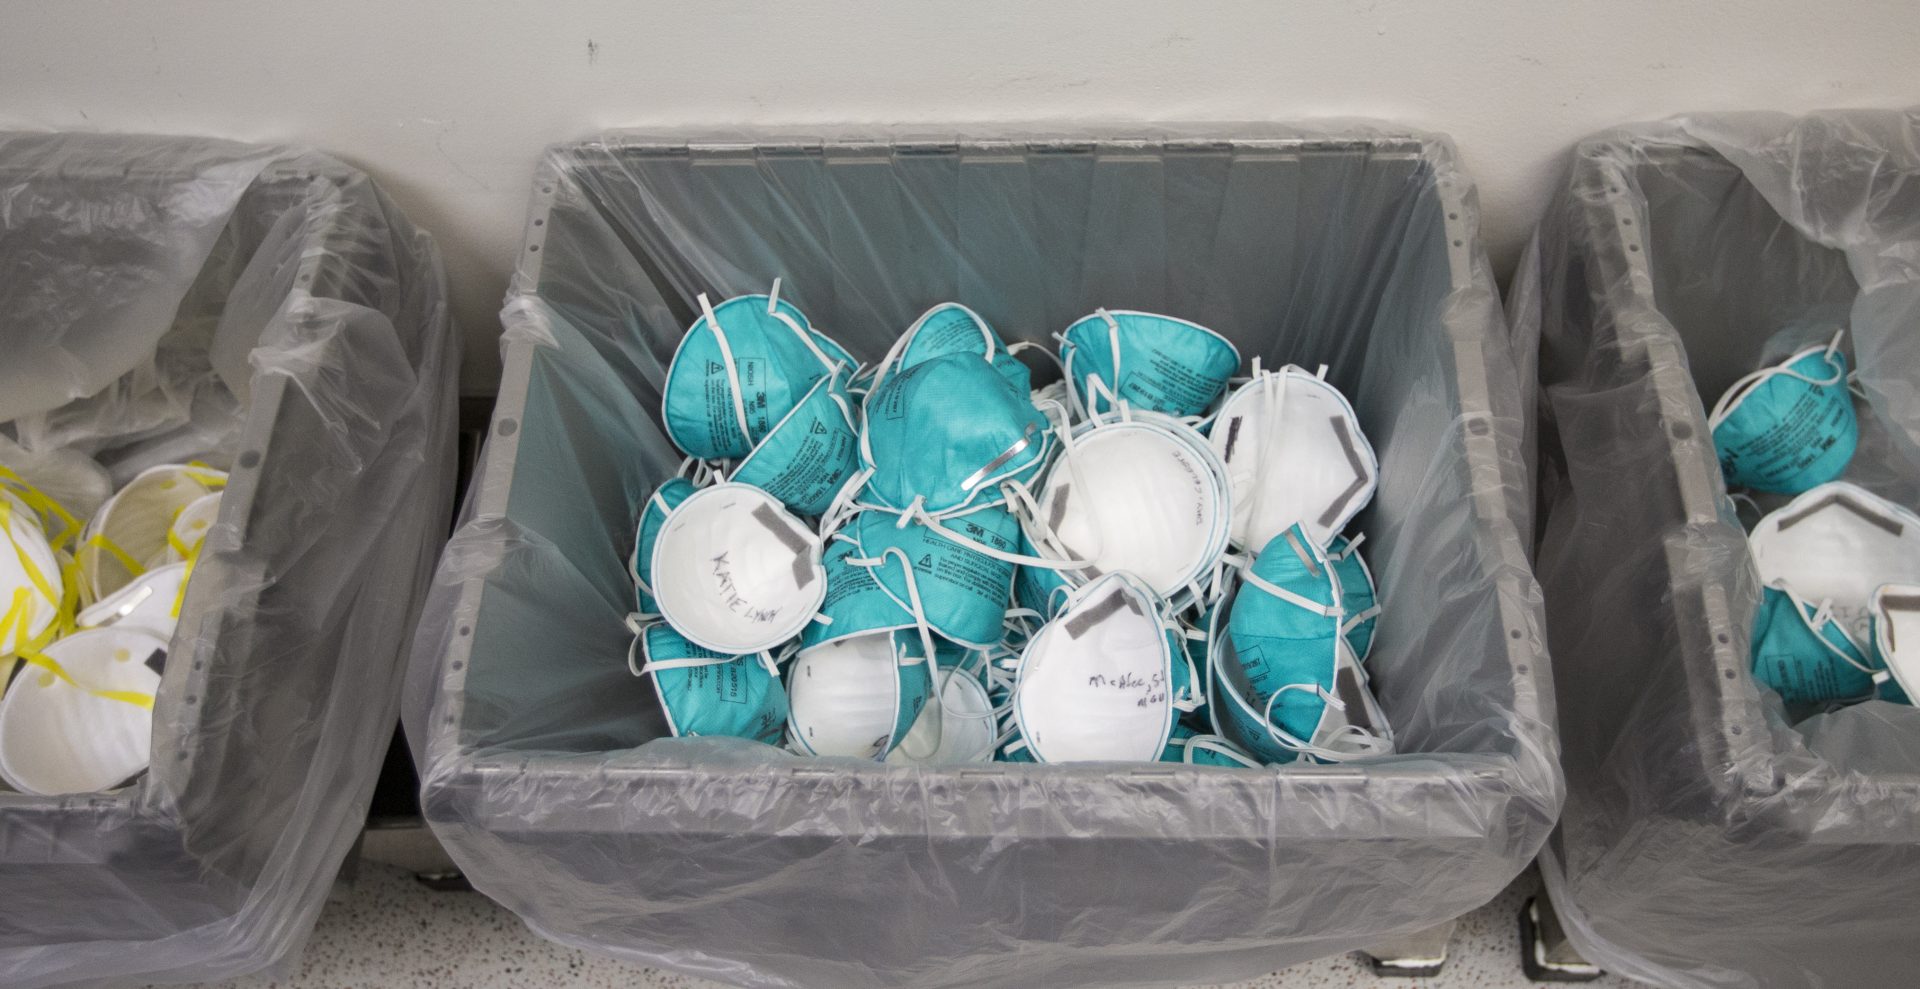 Used N95 masks are collected at Boston's Massachusetts General Hospital on April 13, 2020. Hospital staff wrote their names on the masks so each could be returned after being cleaned, a strategy used to alleviate critical shortages of respirator masks.